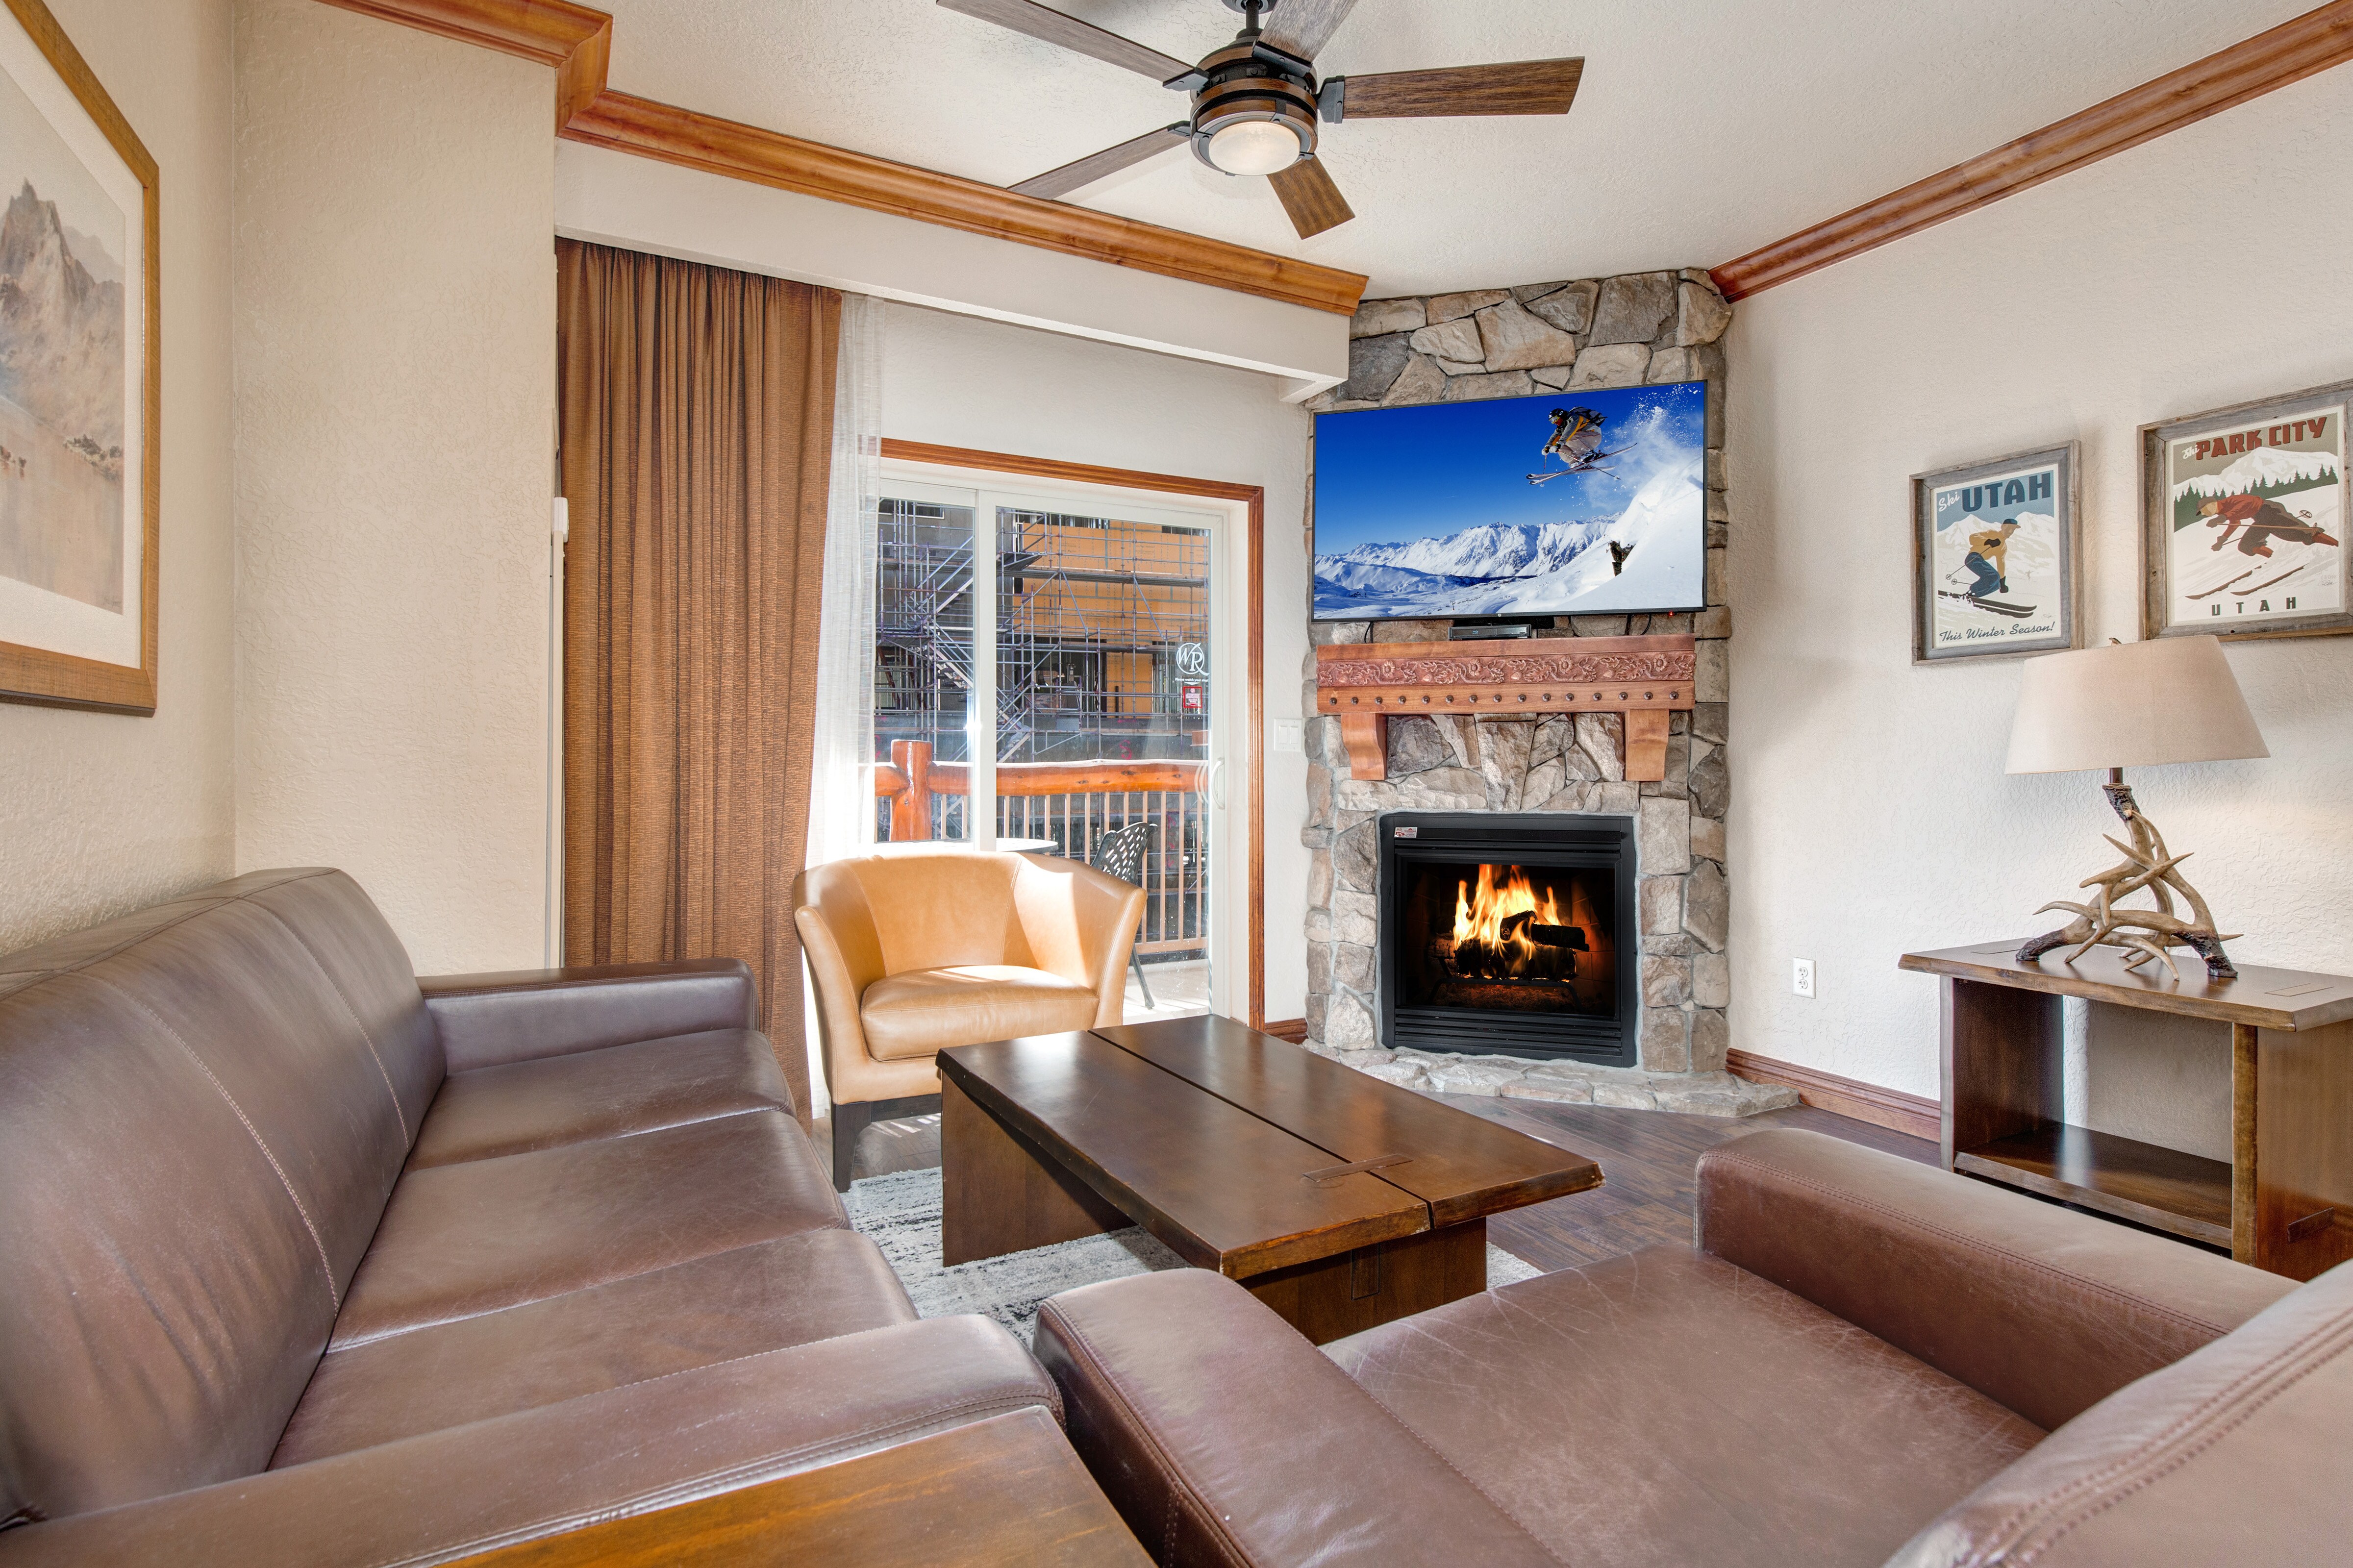 Living Room with gas fireplace, leather furnishings, 55" TV, sofa bed, and private balcony access